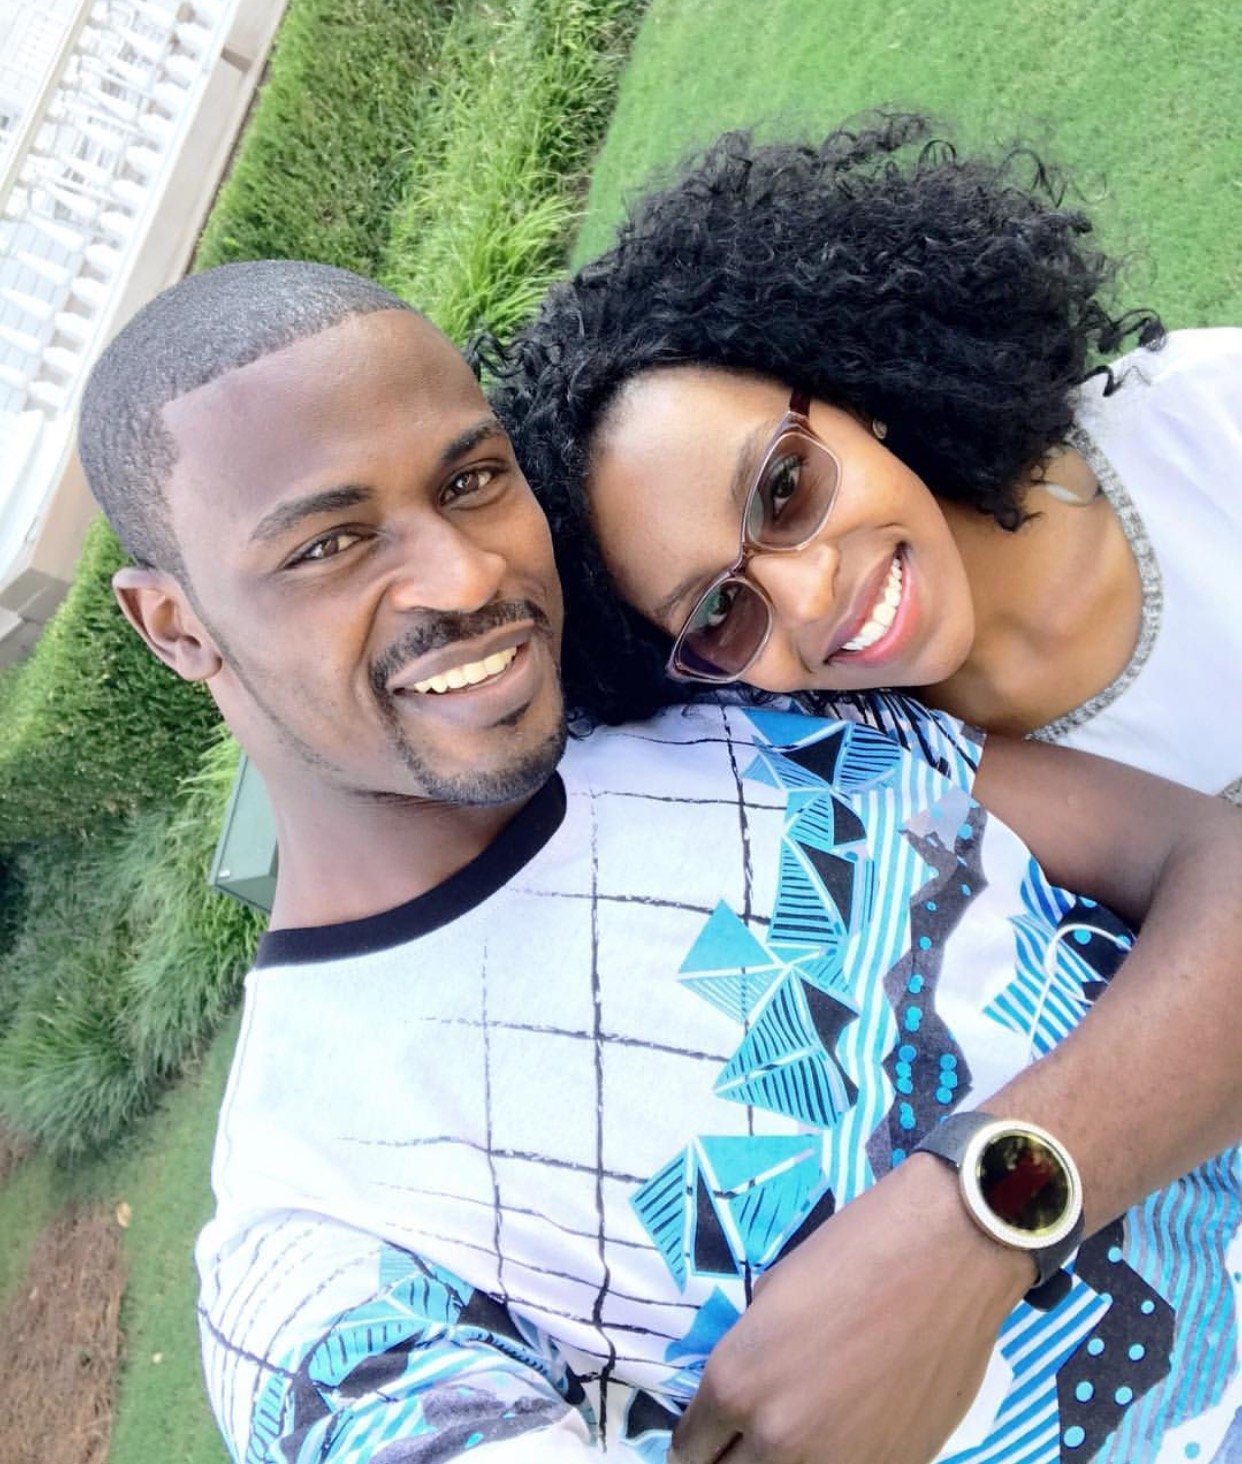 Baby onboard: Gospel singer Benachi and wife expecting their first child!